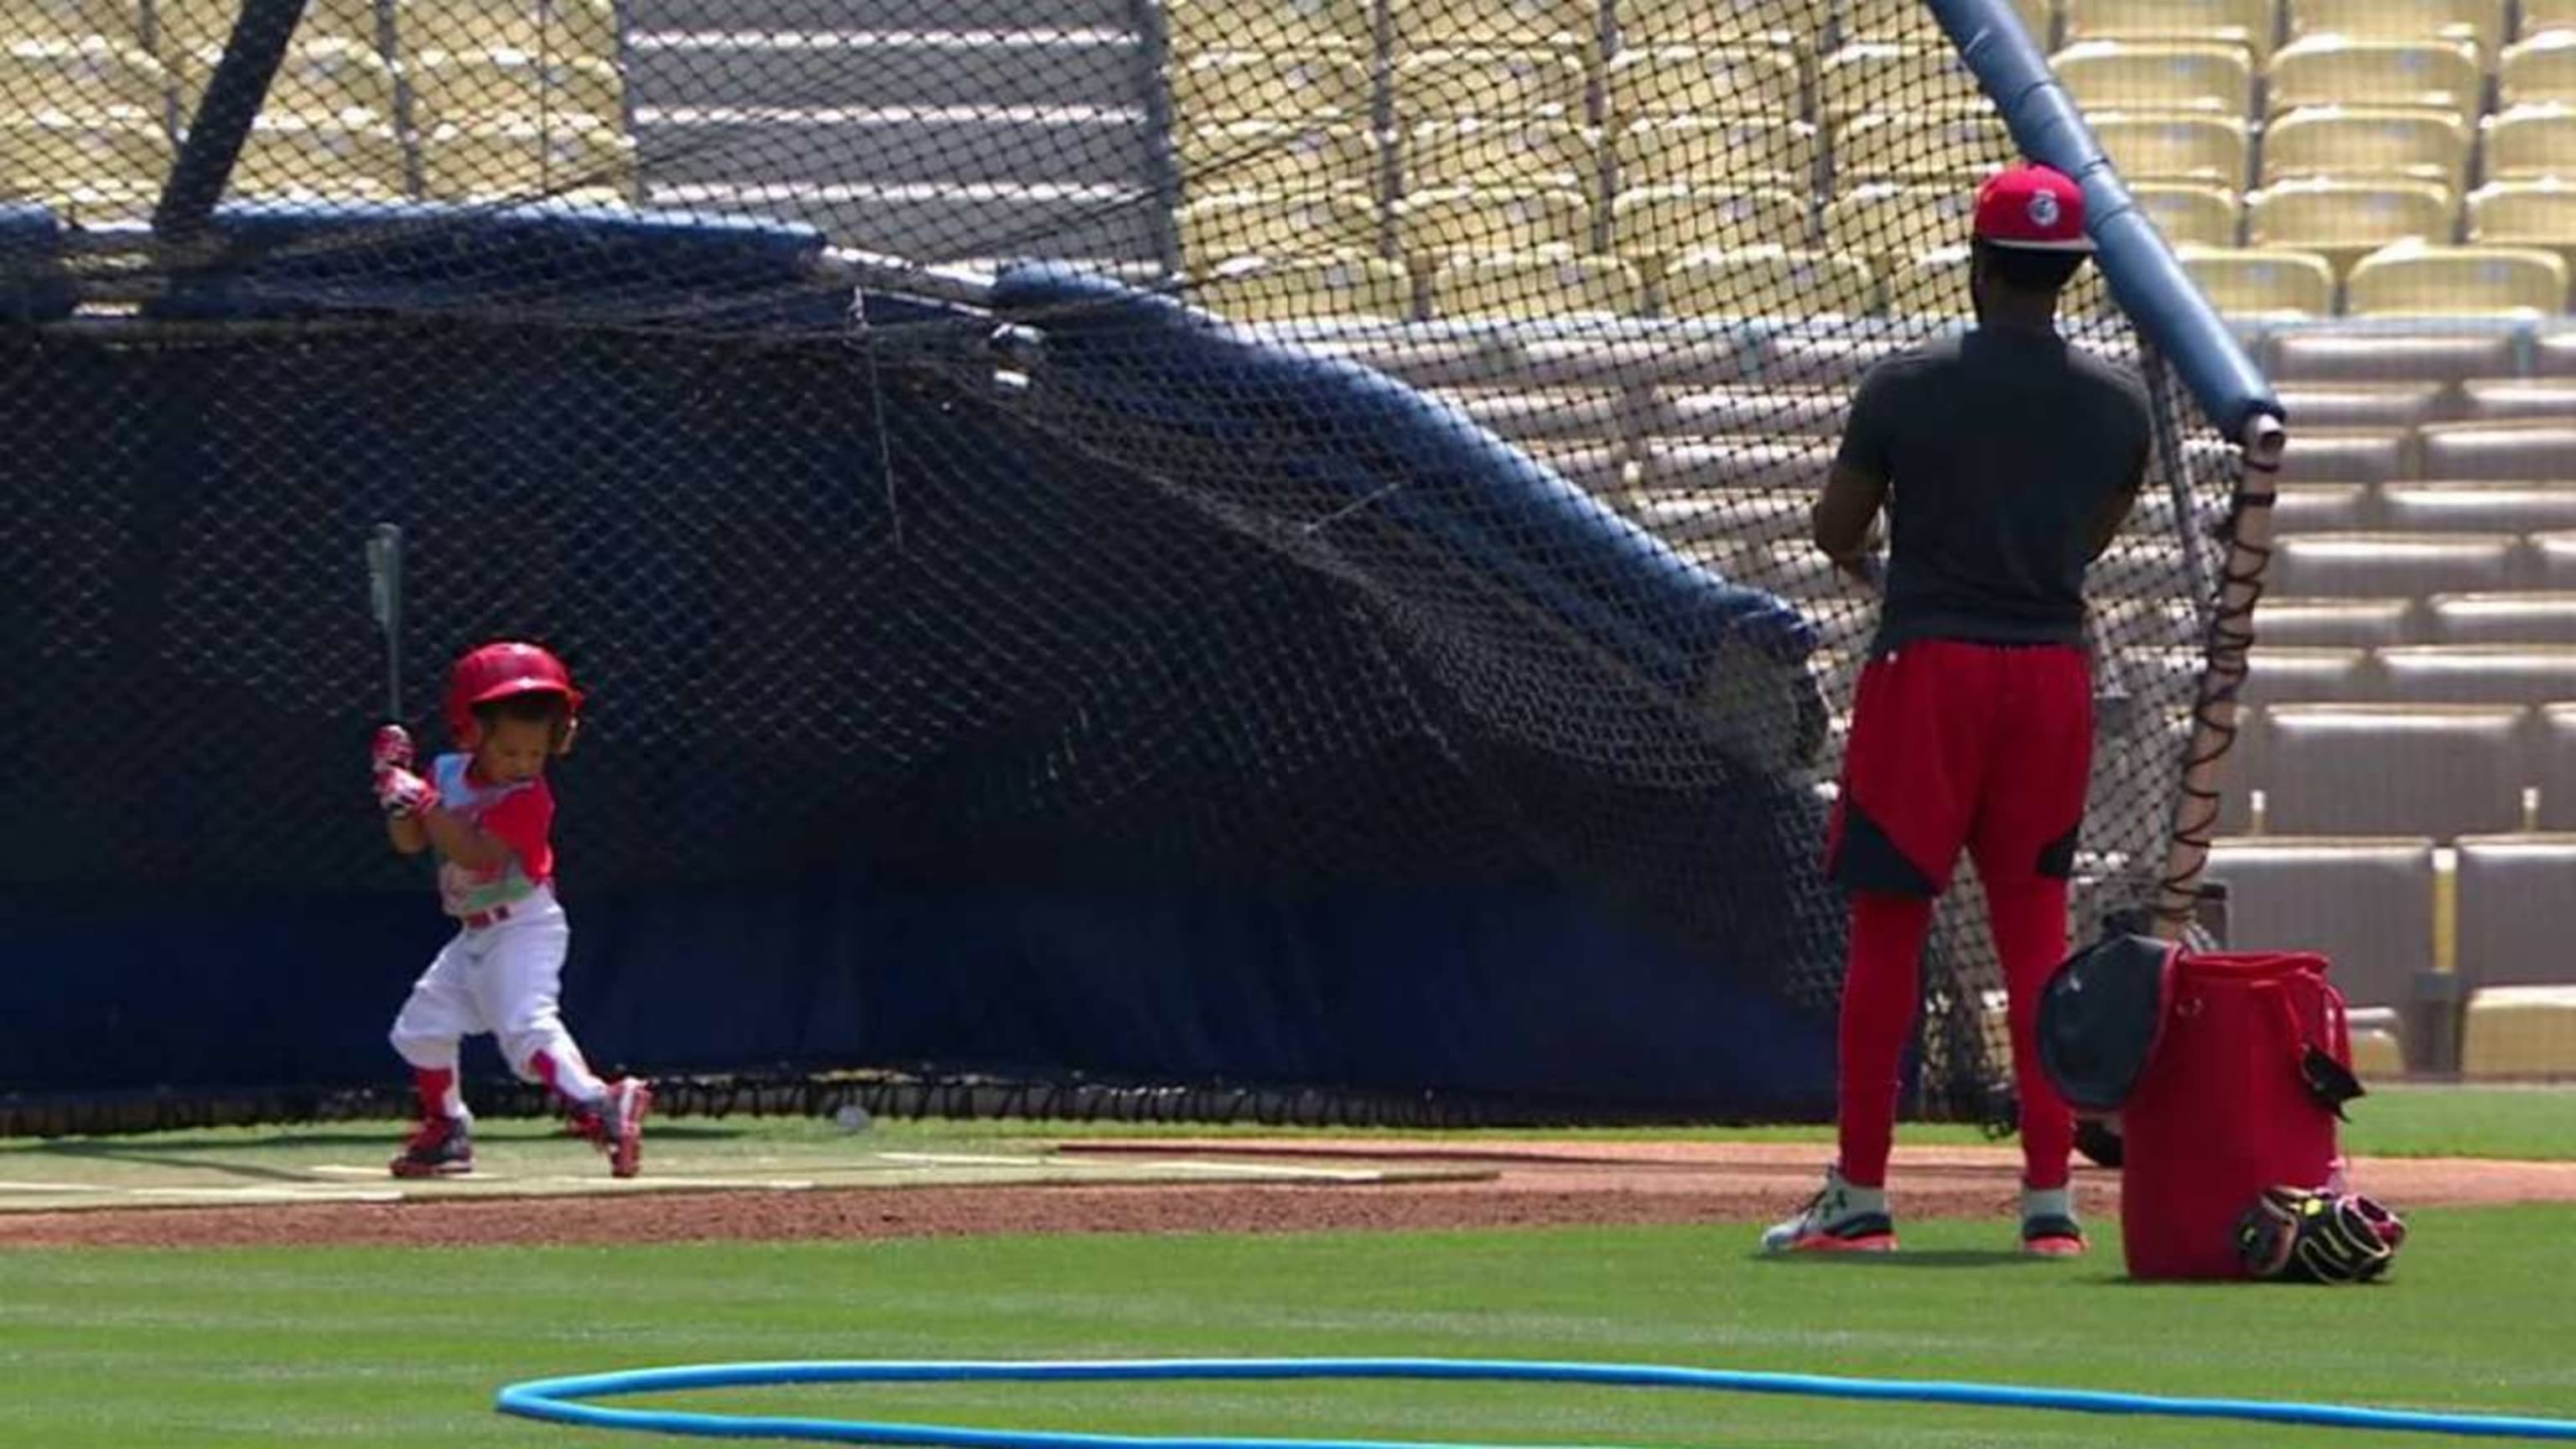 The future of baseball is Brandon Phillips' 2-year-old son